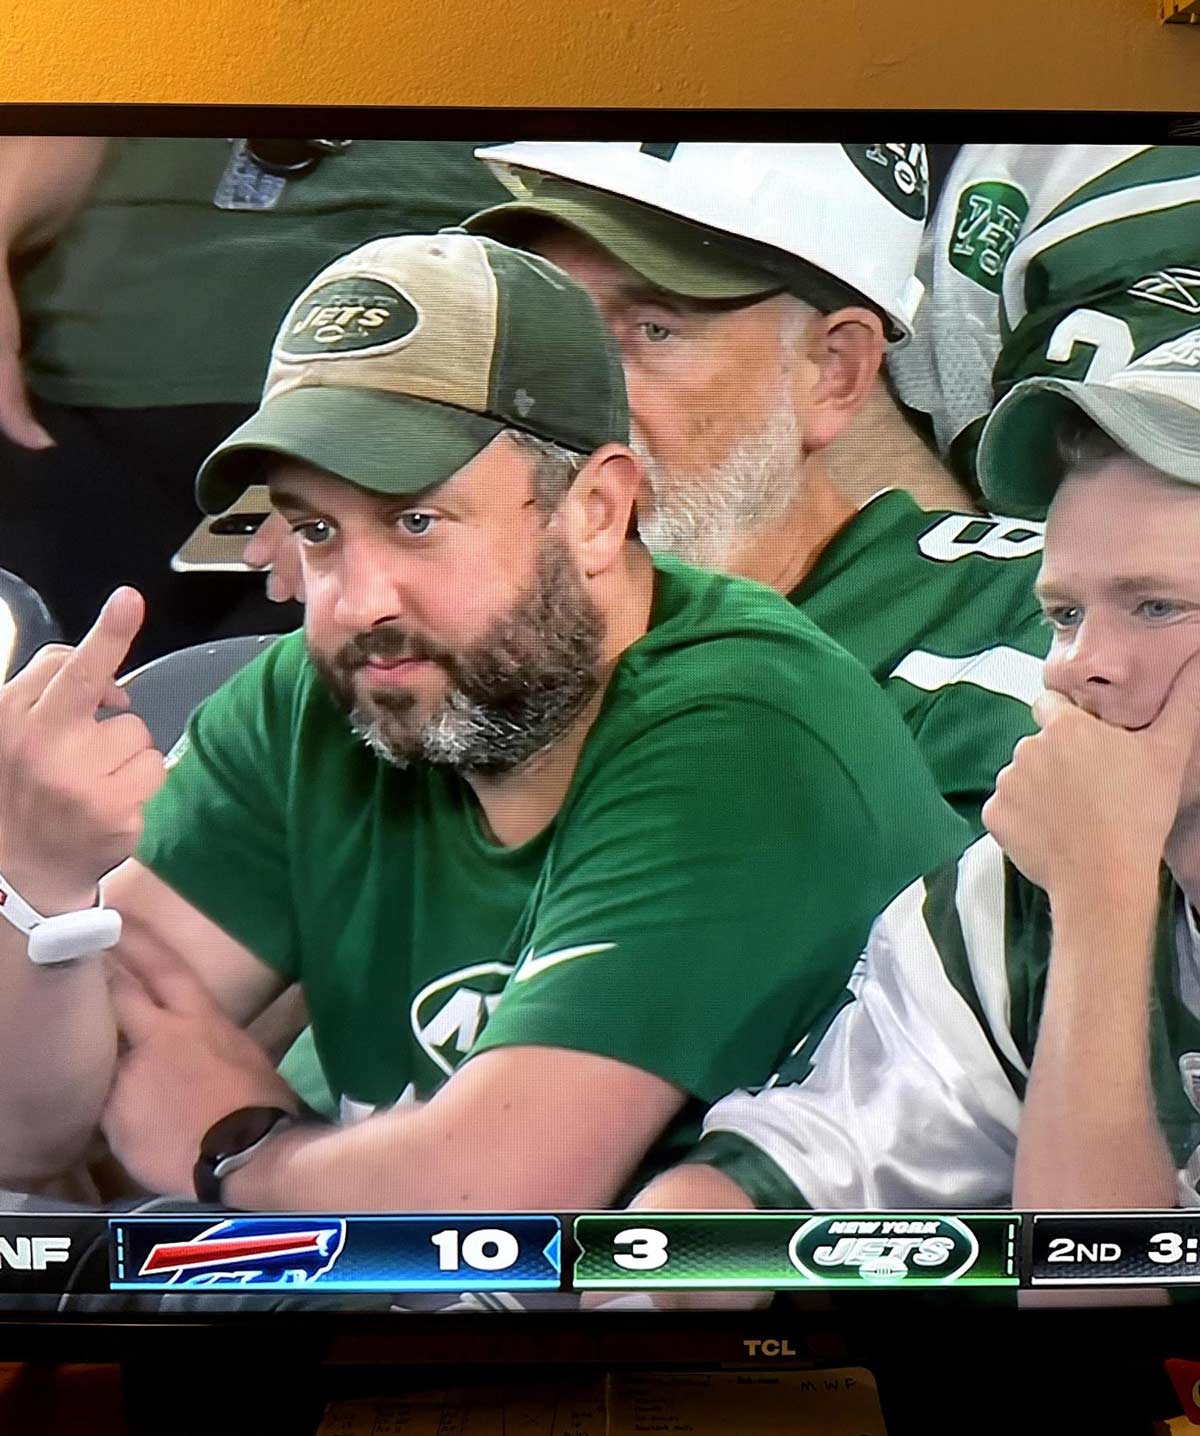 Jets fans are feeling good about the start of the season